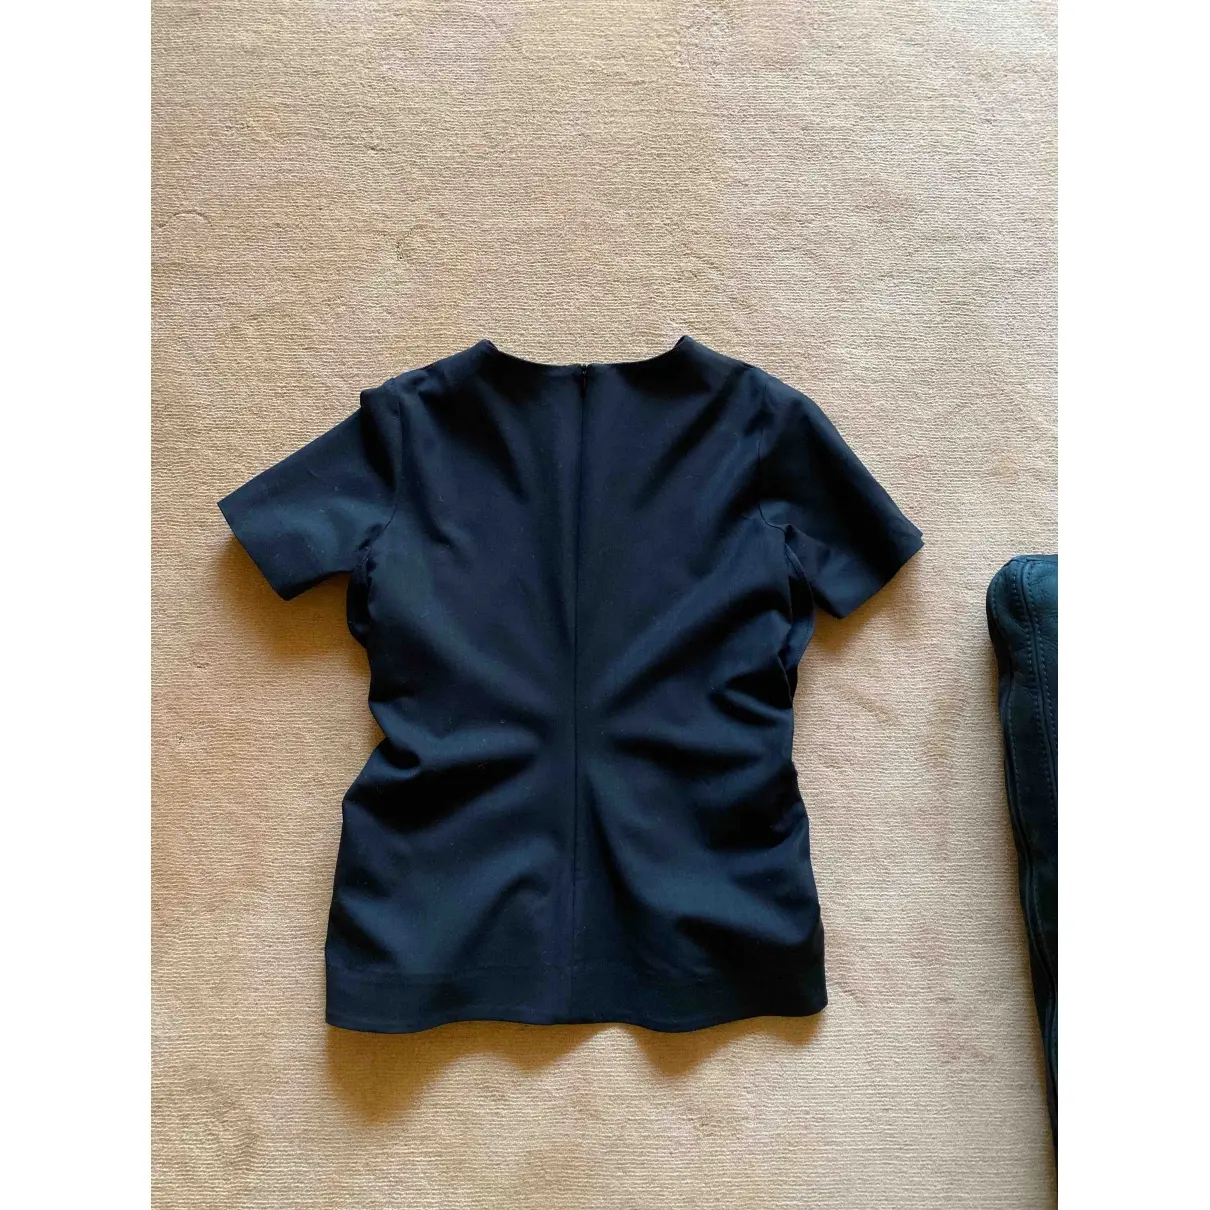 Cos Wool blouse for sale